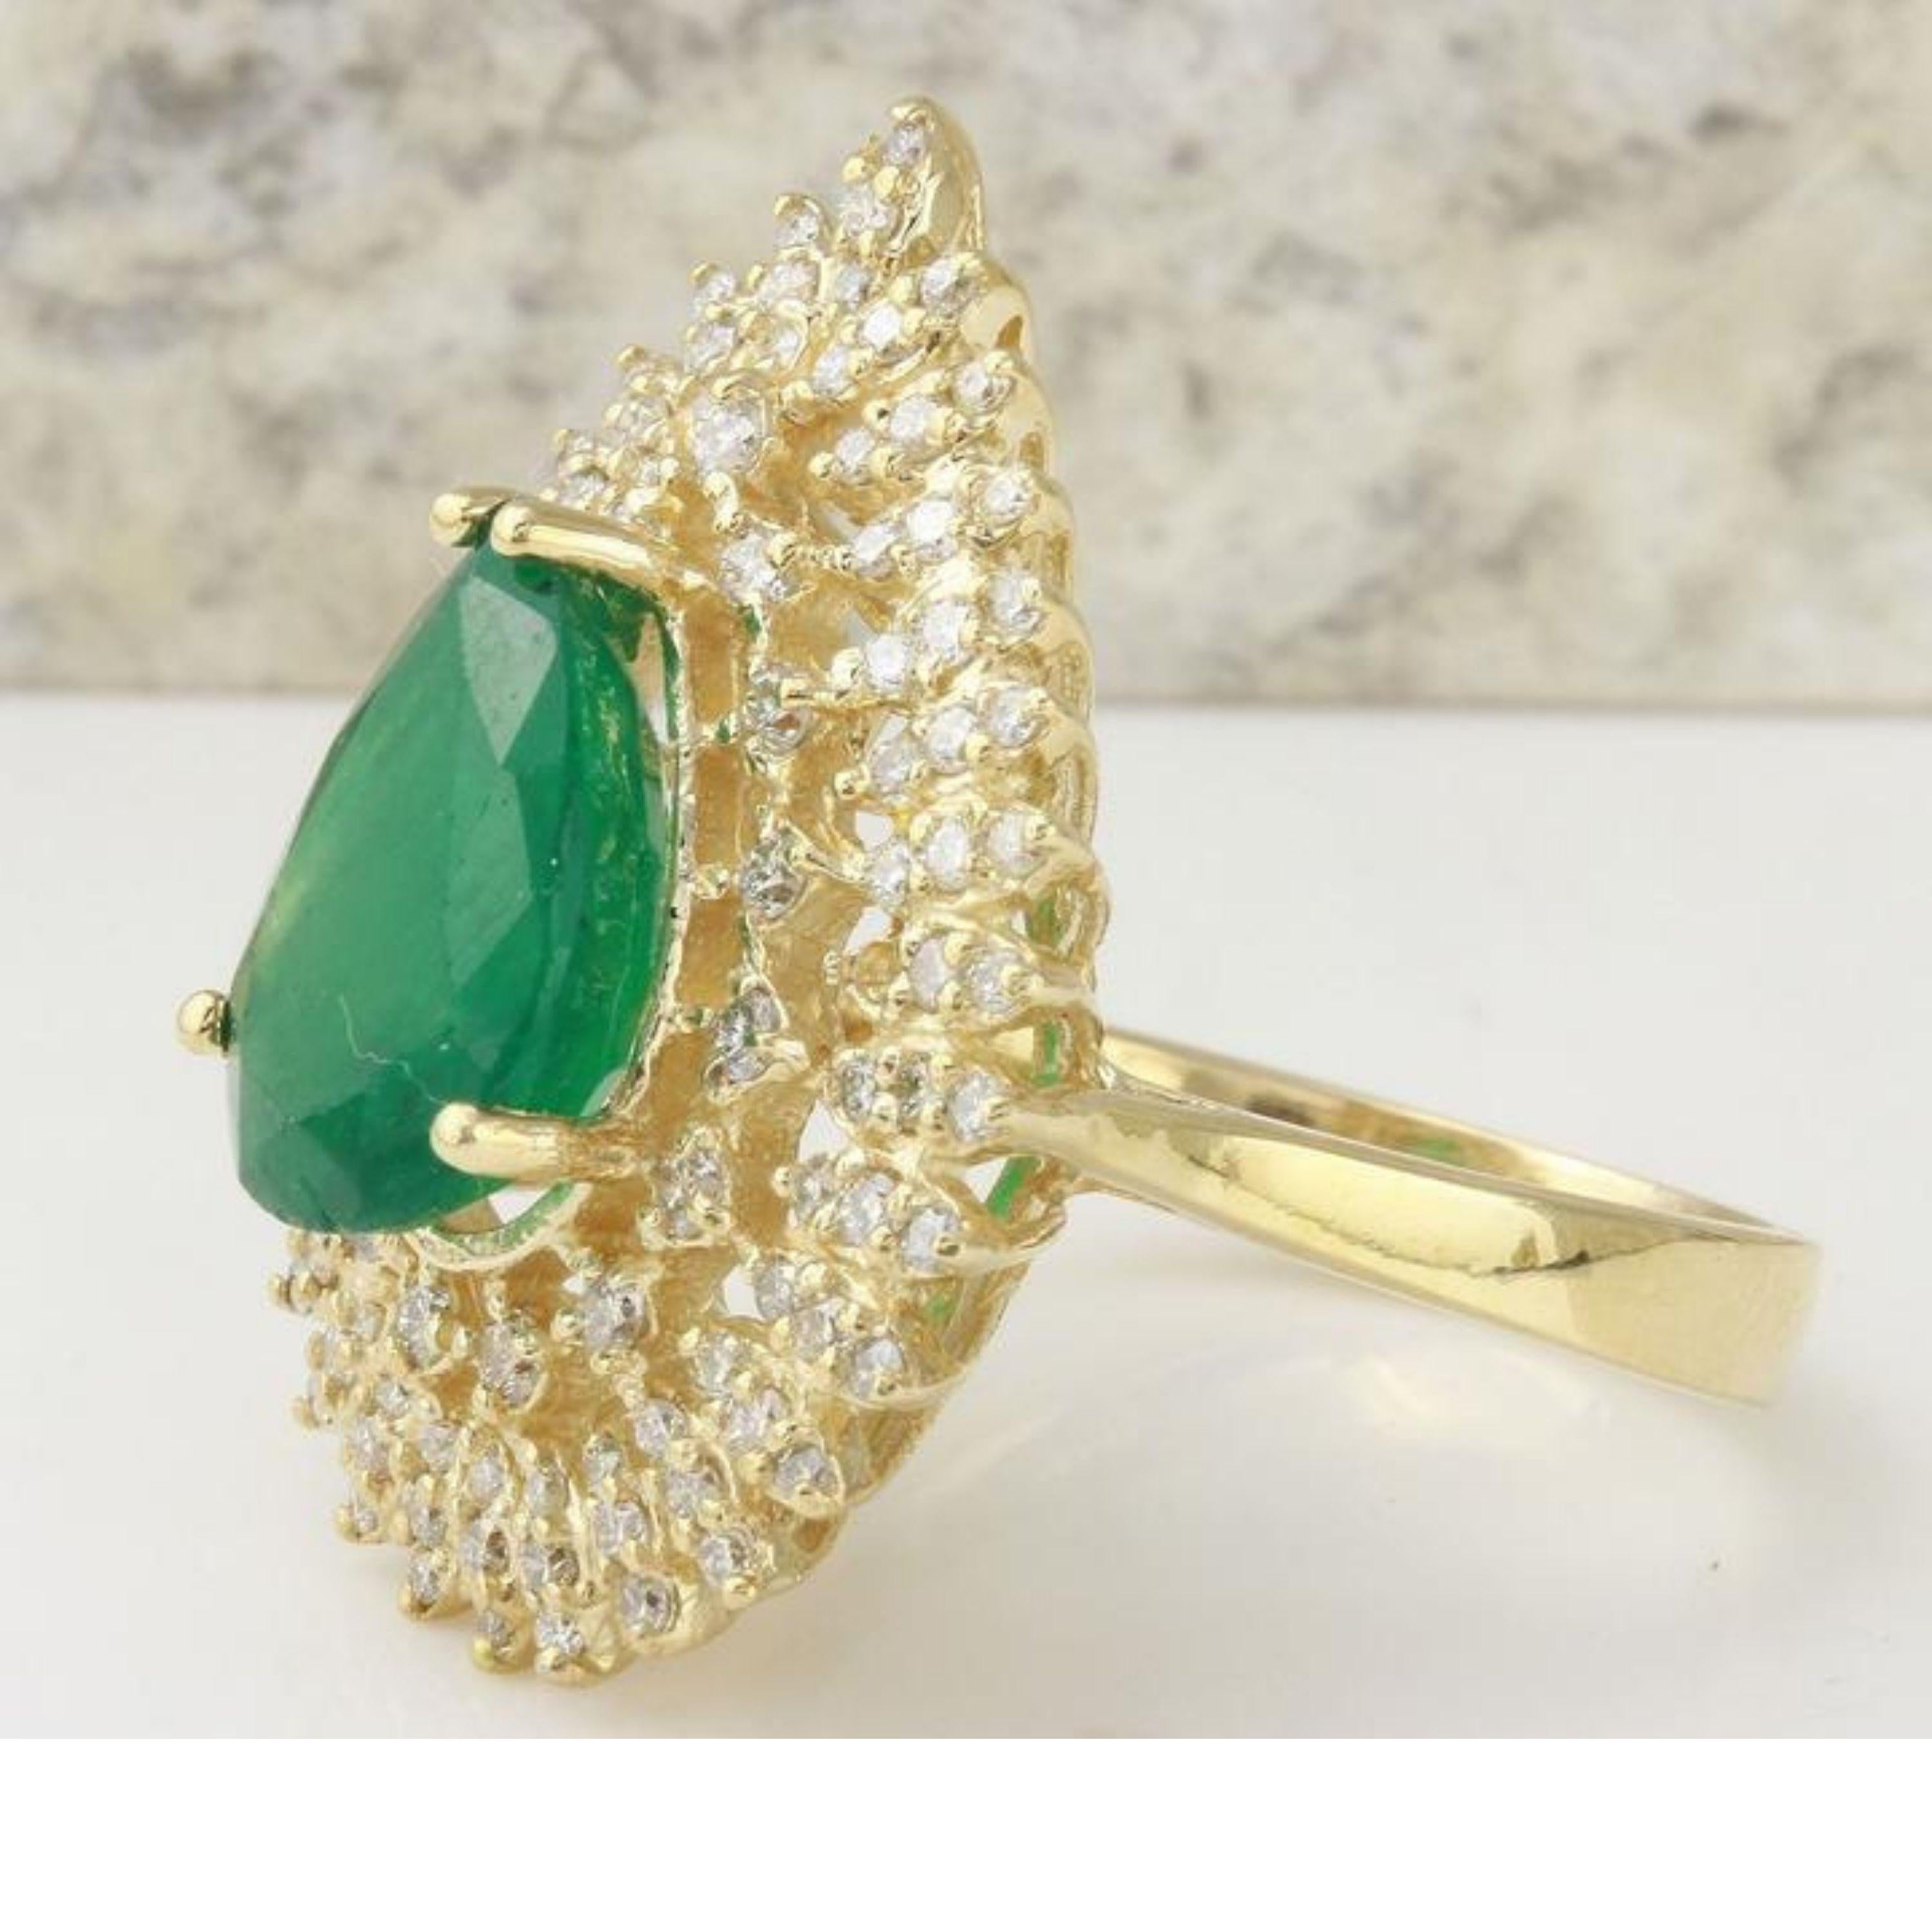 4.80 Carats Natural Emerald and Diamond 14K Solid Yellow Gold Ring

Total Natural Pear Cut Emerald Weight is: 3.30 Carats

Emerald Measures: 12.12 x 8.77mm

Head of the ring measures: 26.3 x 20.35

Natural Round Diamonds Weight: 1.50 Carats (color